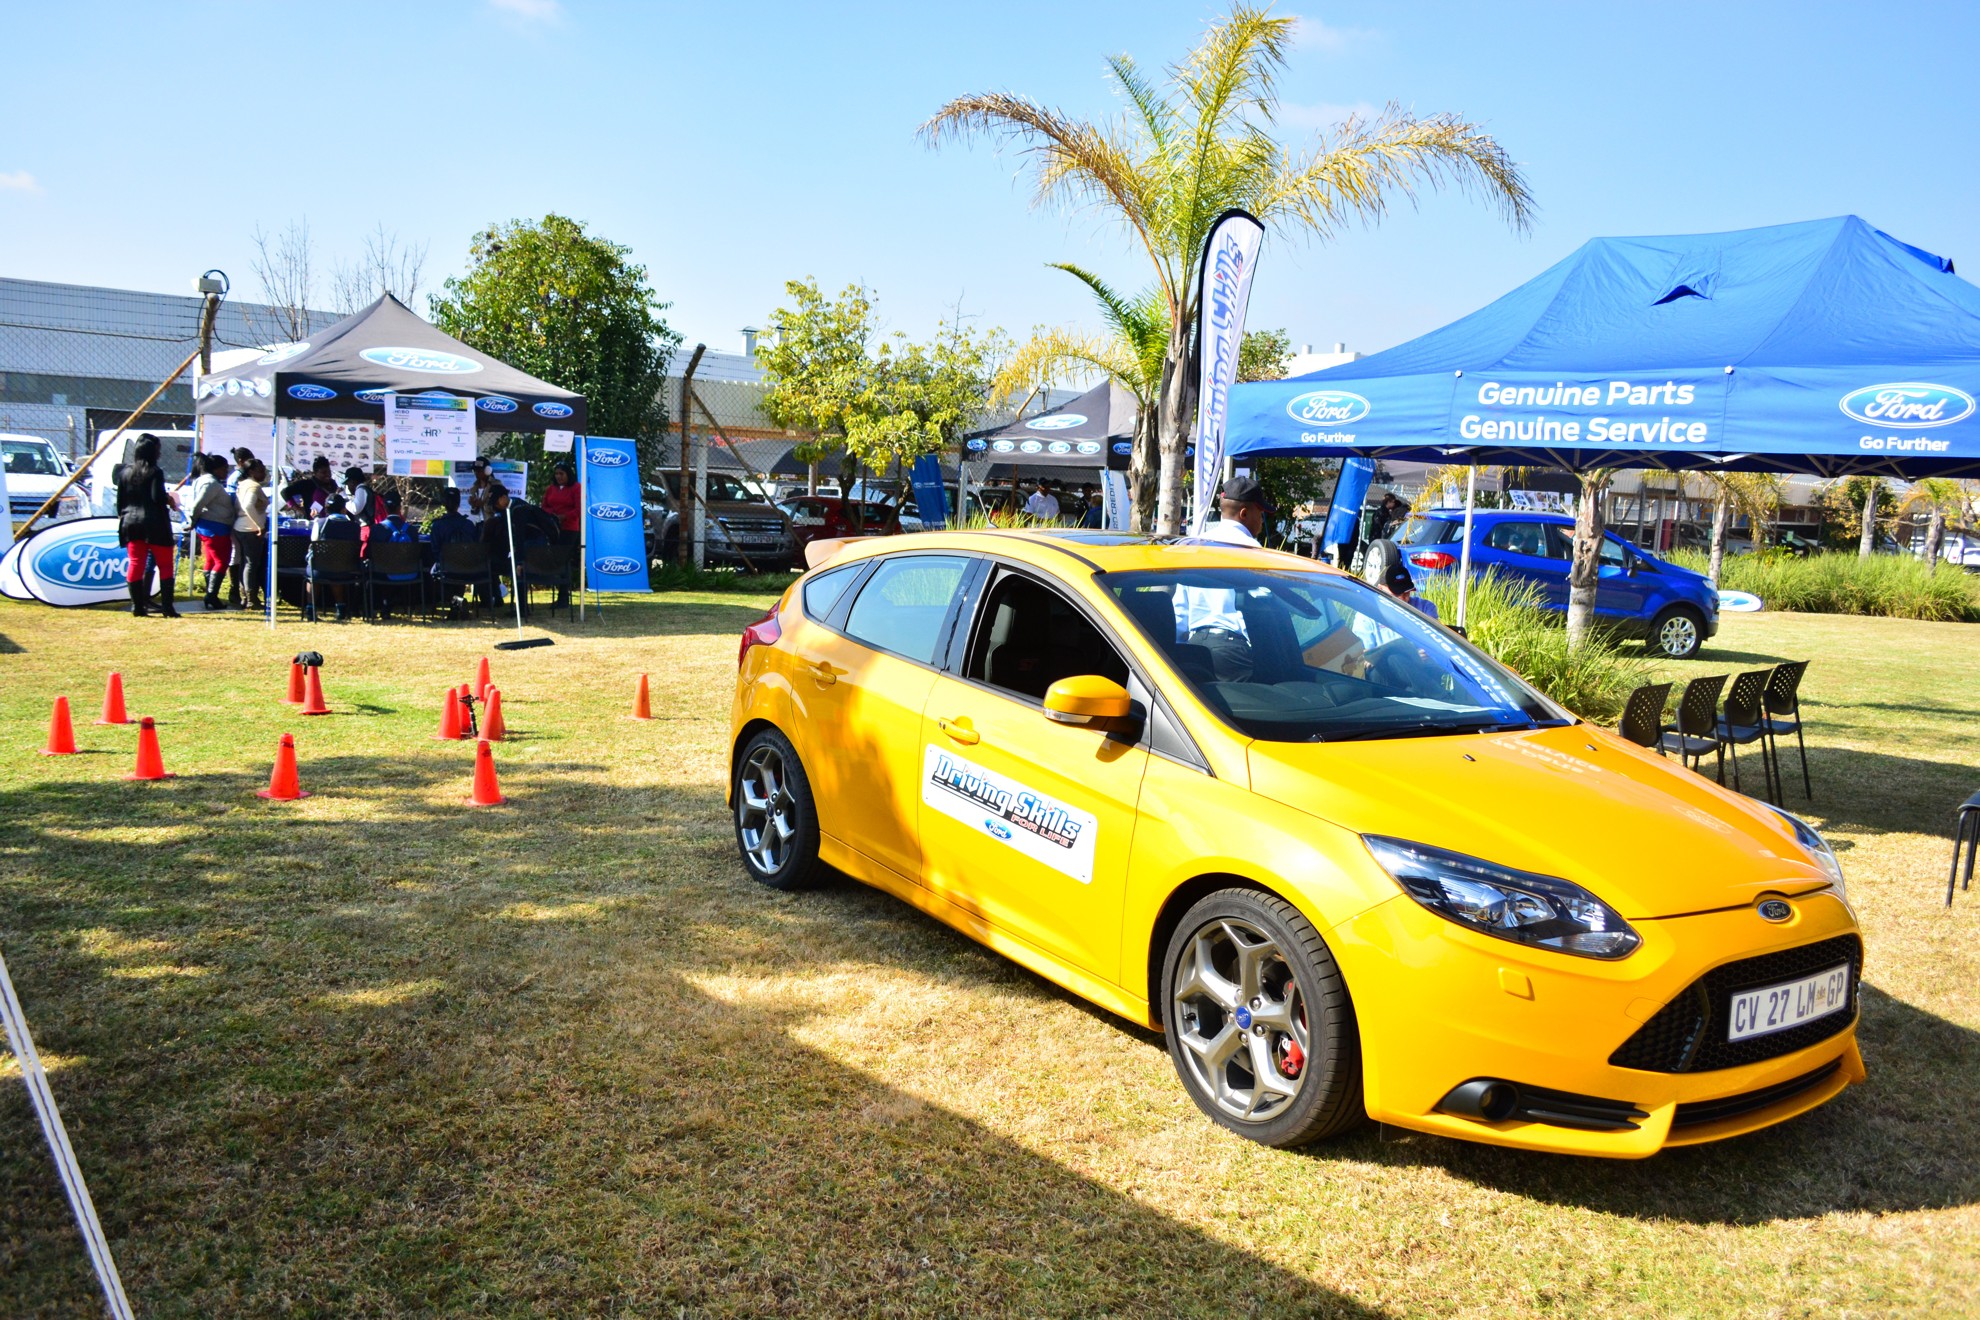 Ford South Africa Exposes Youths To Motor Industry Career Opportunities